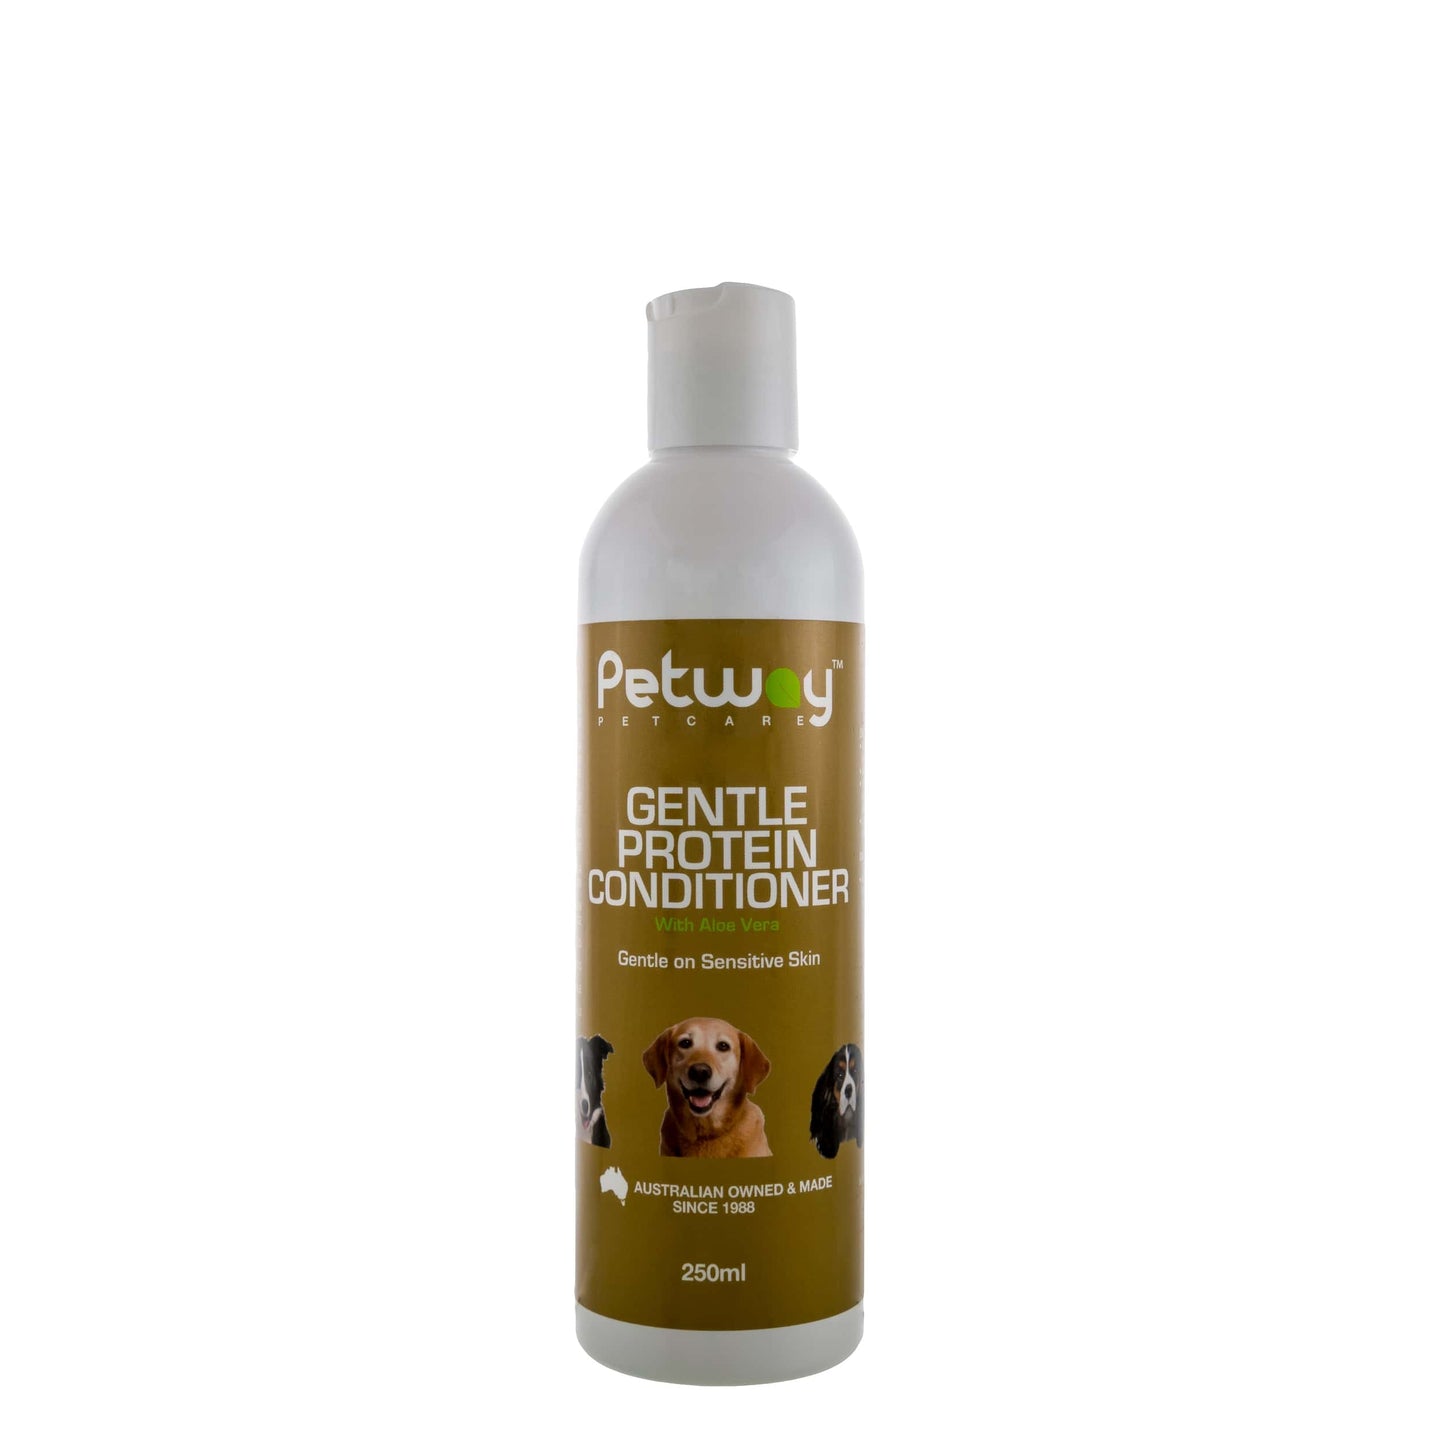 Petway Petcare Gentle Protein Conditioner with Aloe - Assorted Sizes (WH)